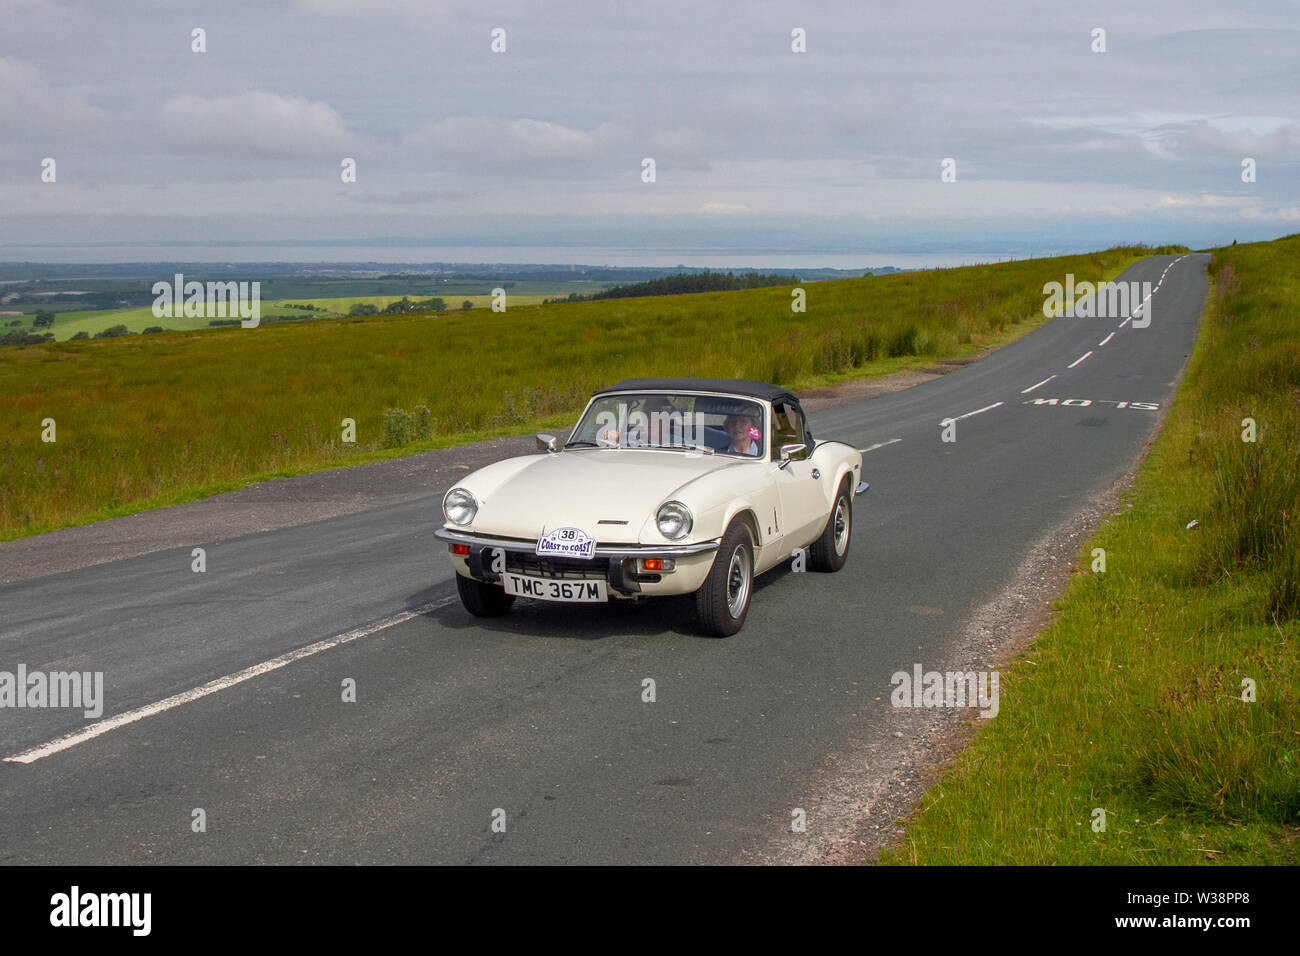 1973 70s white Triumph Spitfire at Scorton, Lancashire.  Sunny conditions as the Lancashire Car Club Rally Coast to Coast crosses the Trough of Bowland. Vintage, classic, collectible, heritage, historics vehicles left Morecambe heading for a cross county journey over the Lancashire landscape to Whitby. Stock Photo